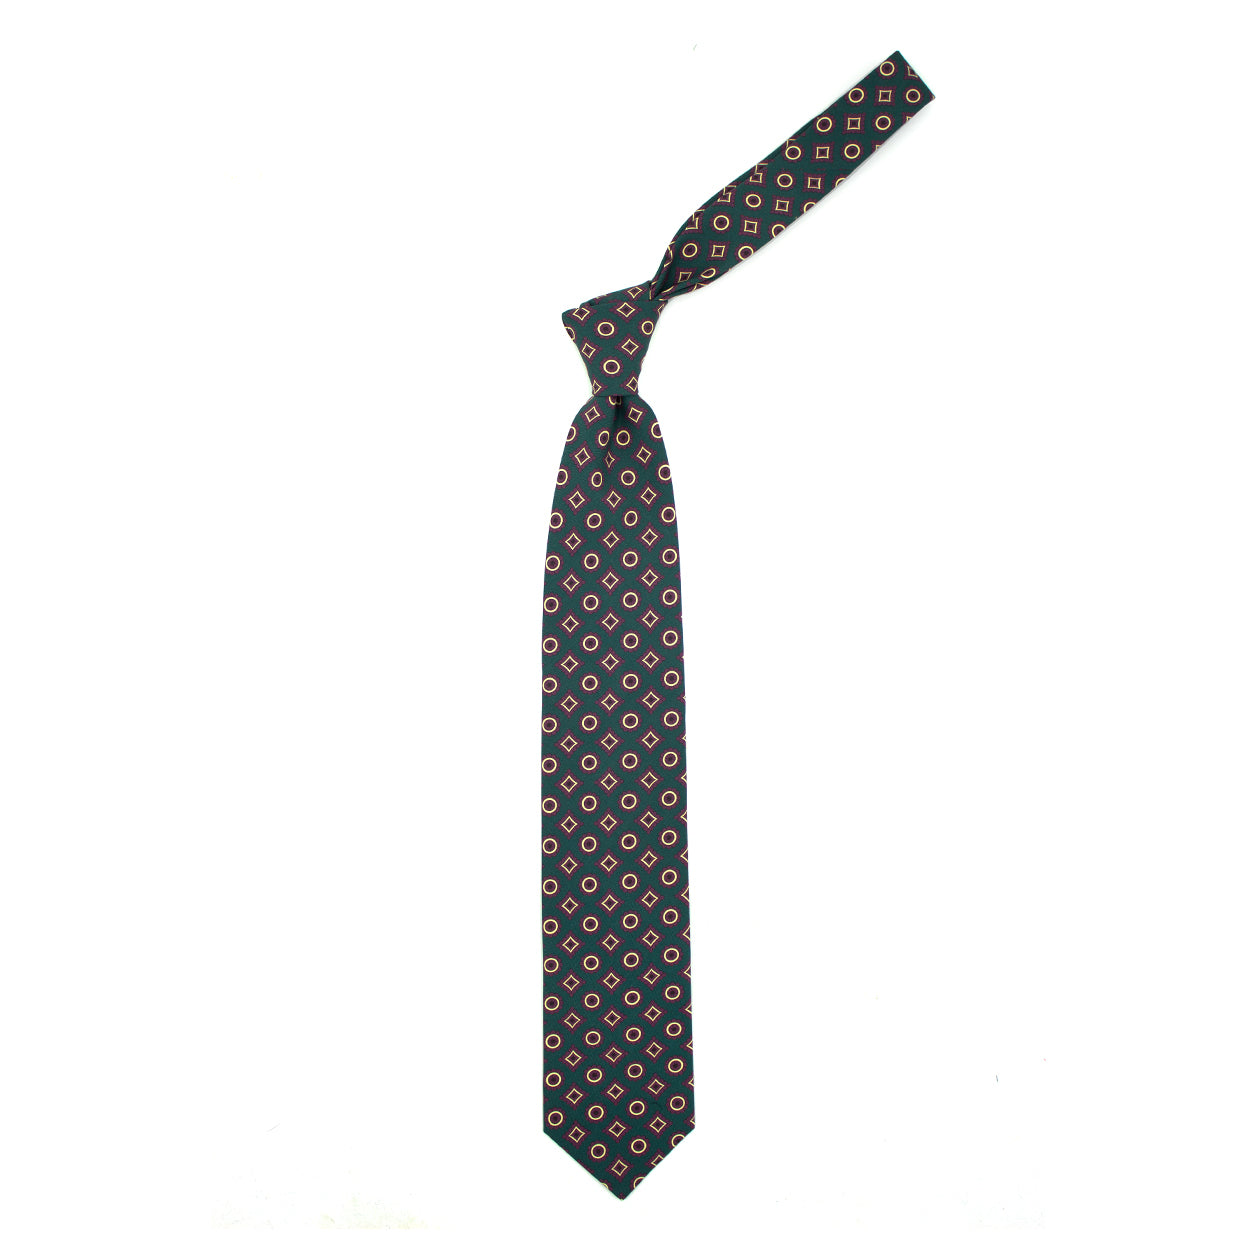 Green tie with burgundy and cream geometric pattern